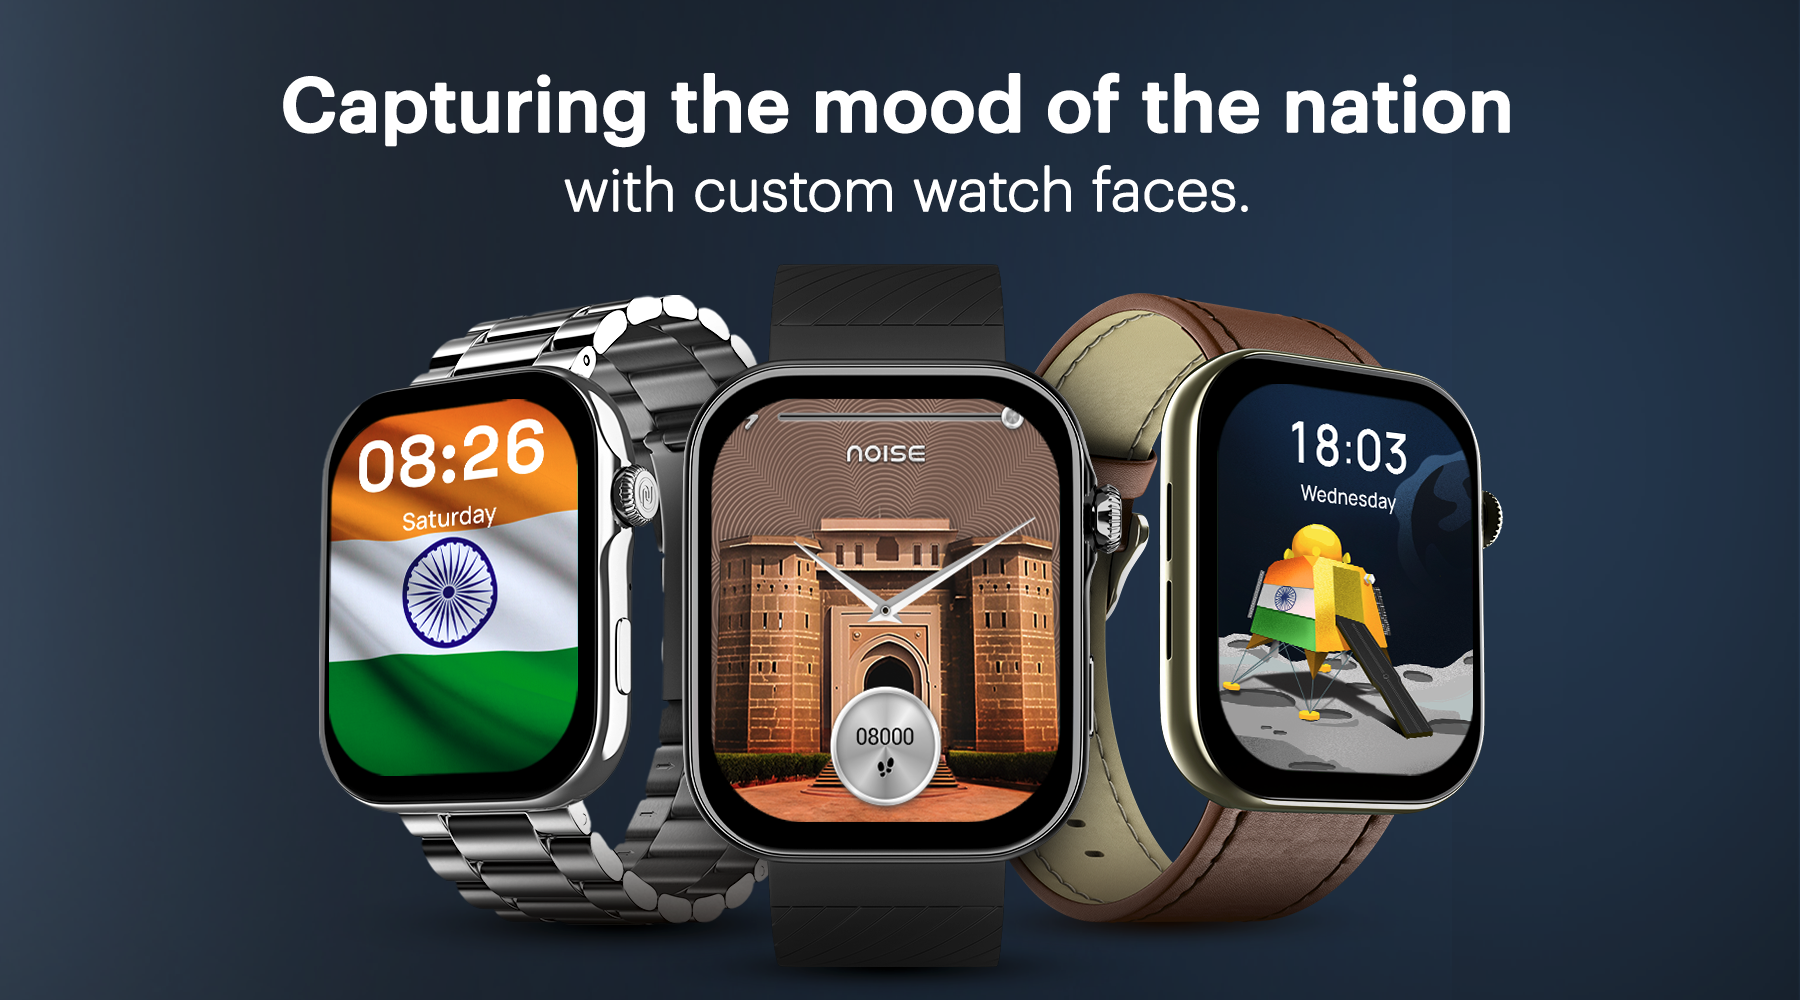 Hello Watch 3 Plus SmartWatch - New Amazing Watch Faces with Features like  Apple Watch Ultra 2 